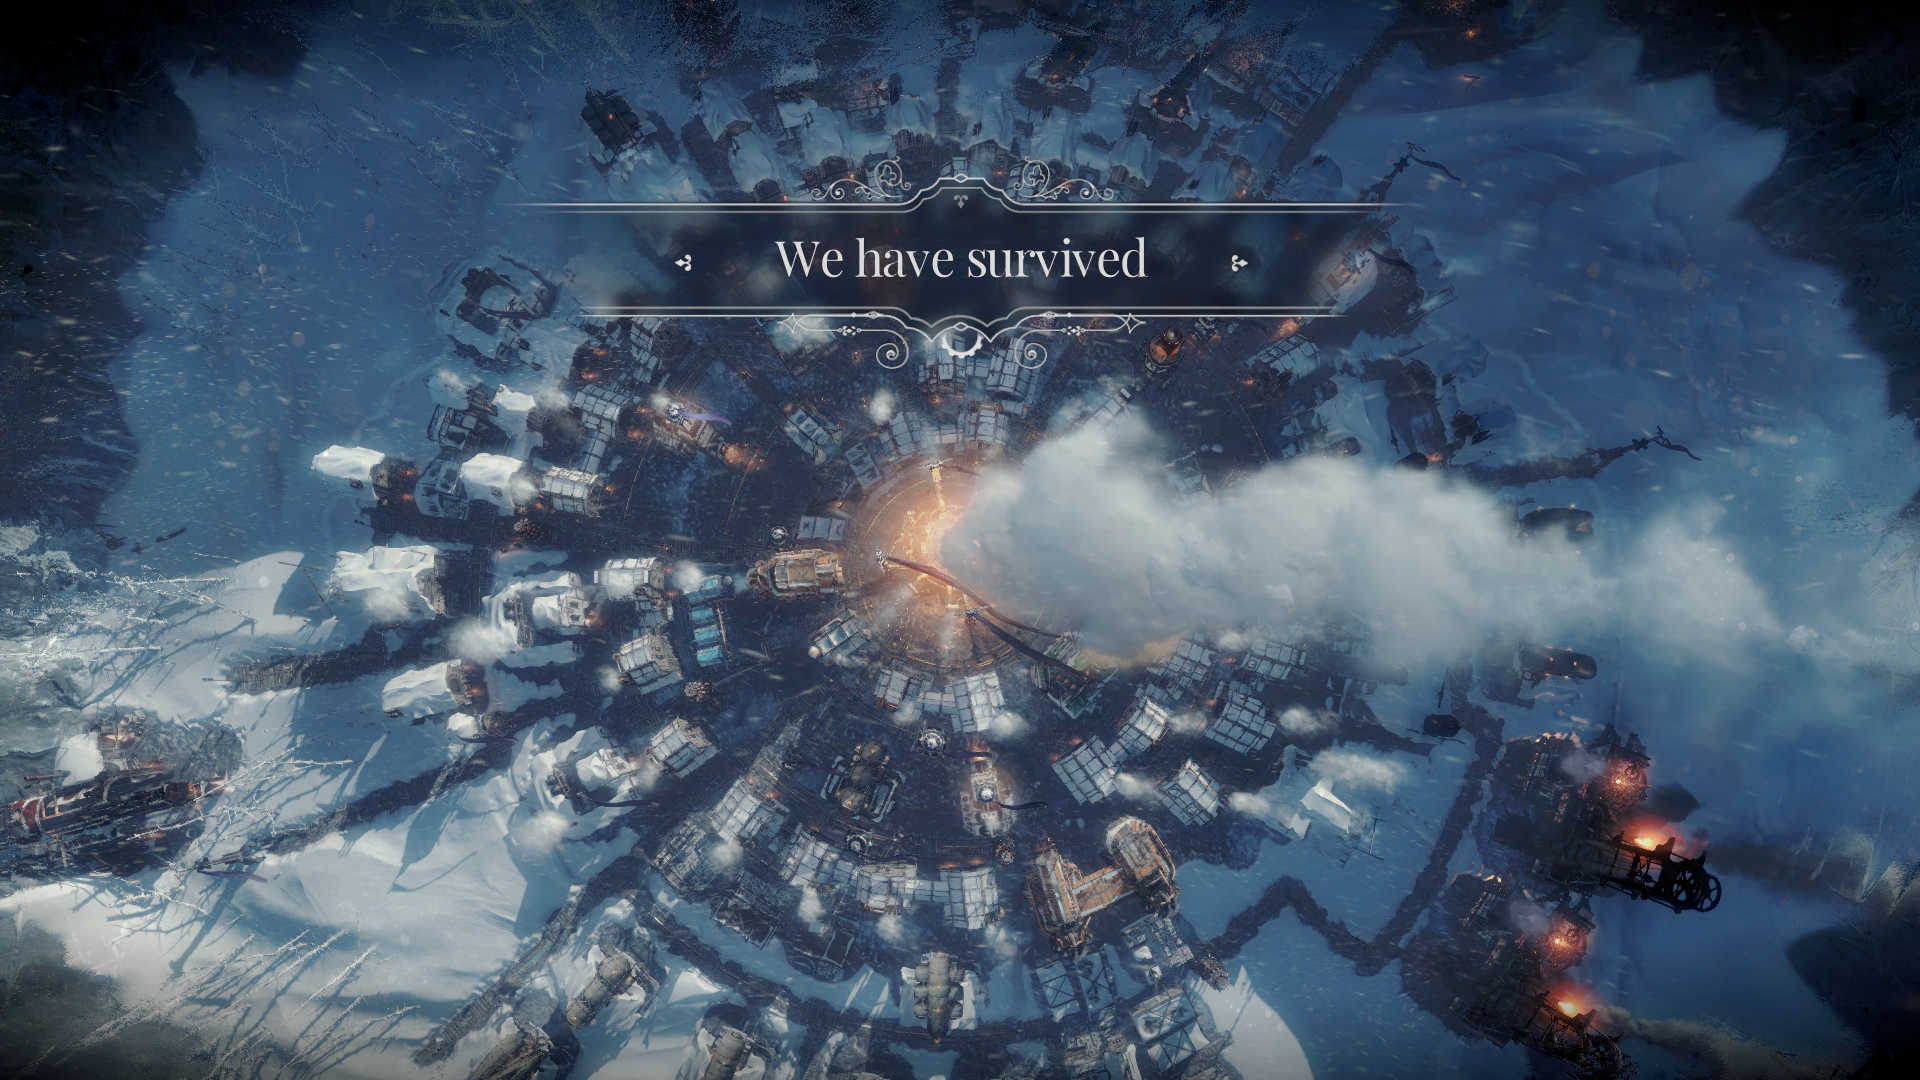 We have survived in Frostpunk.